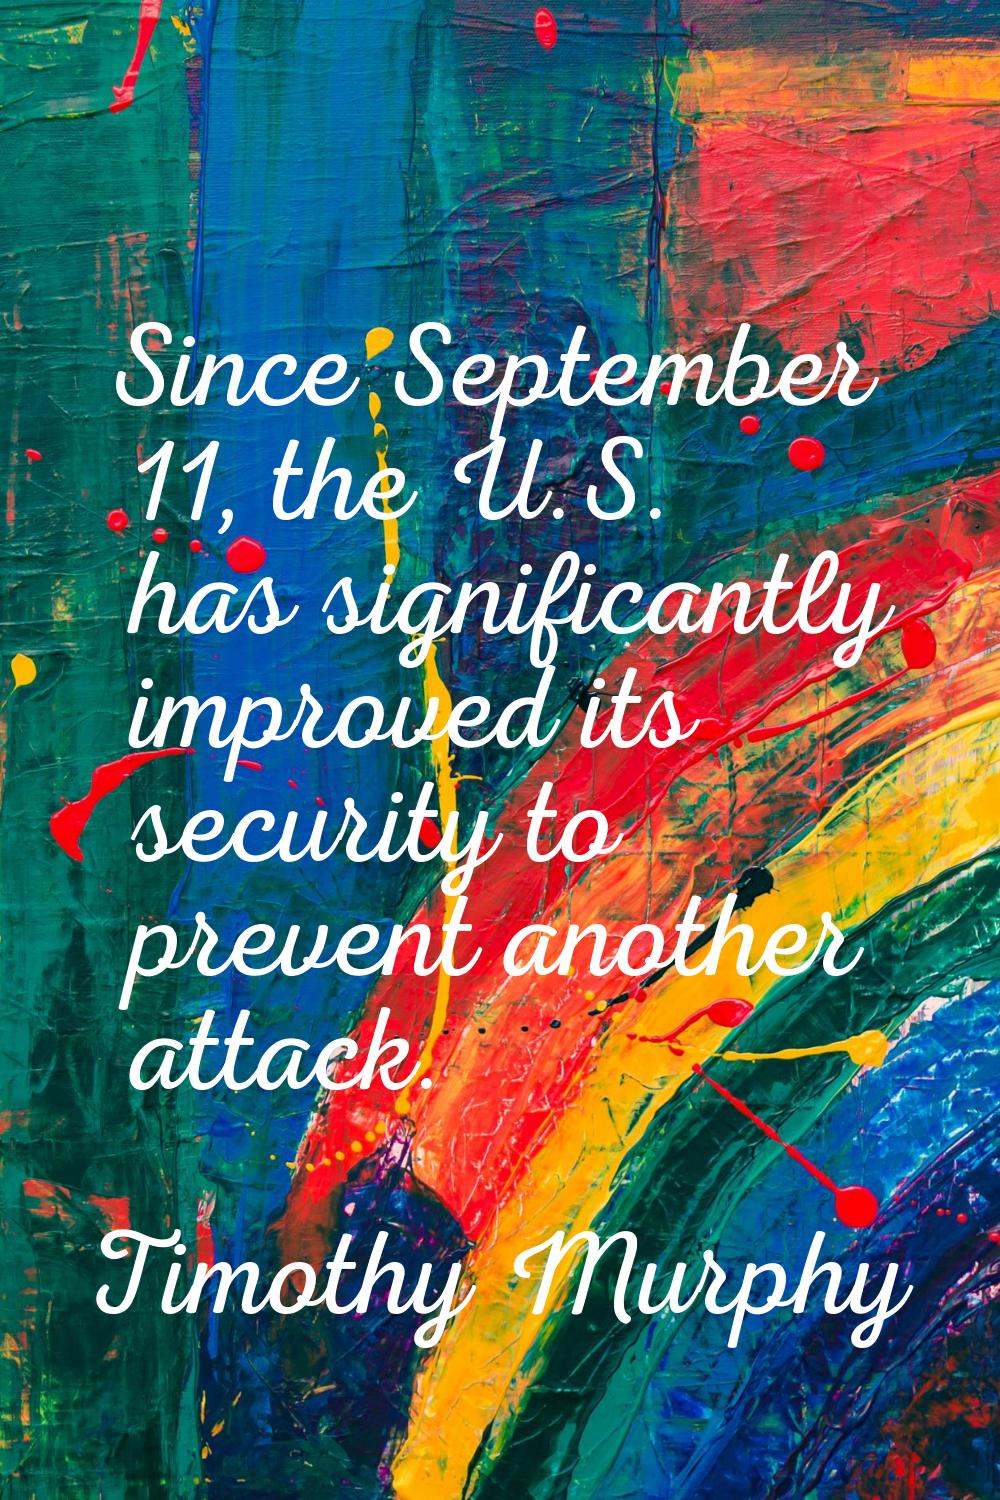 Since September 11, the U.S. has significantly improved its security to prevent another attack.